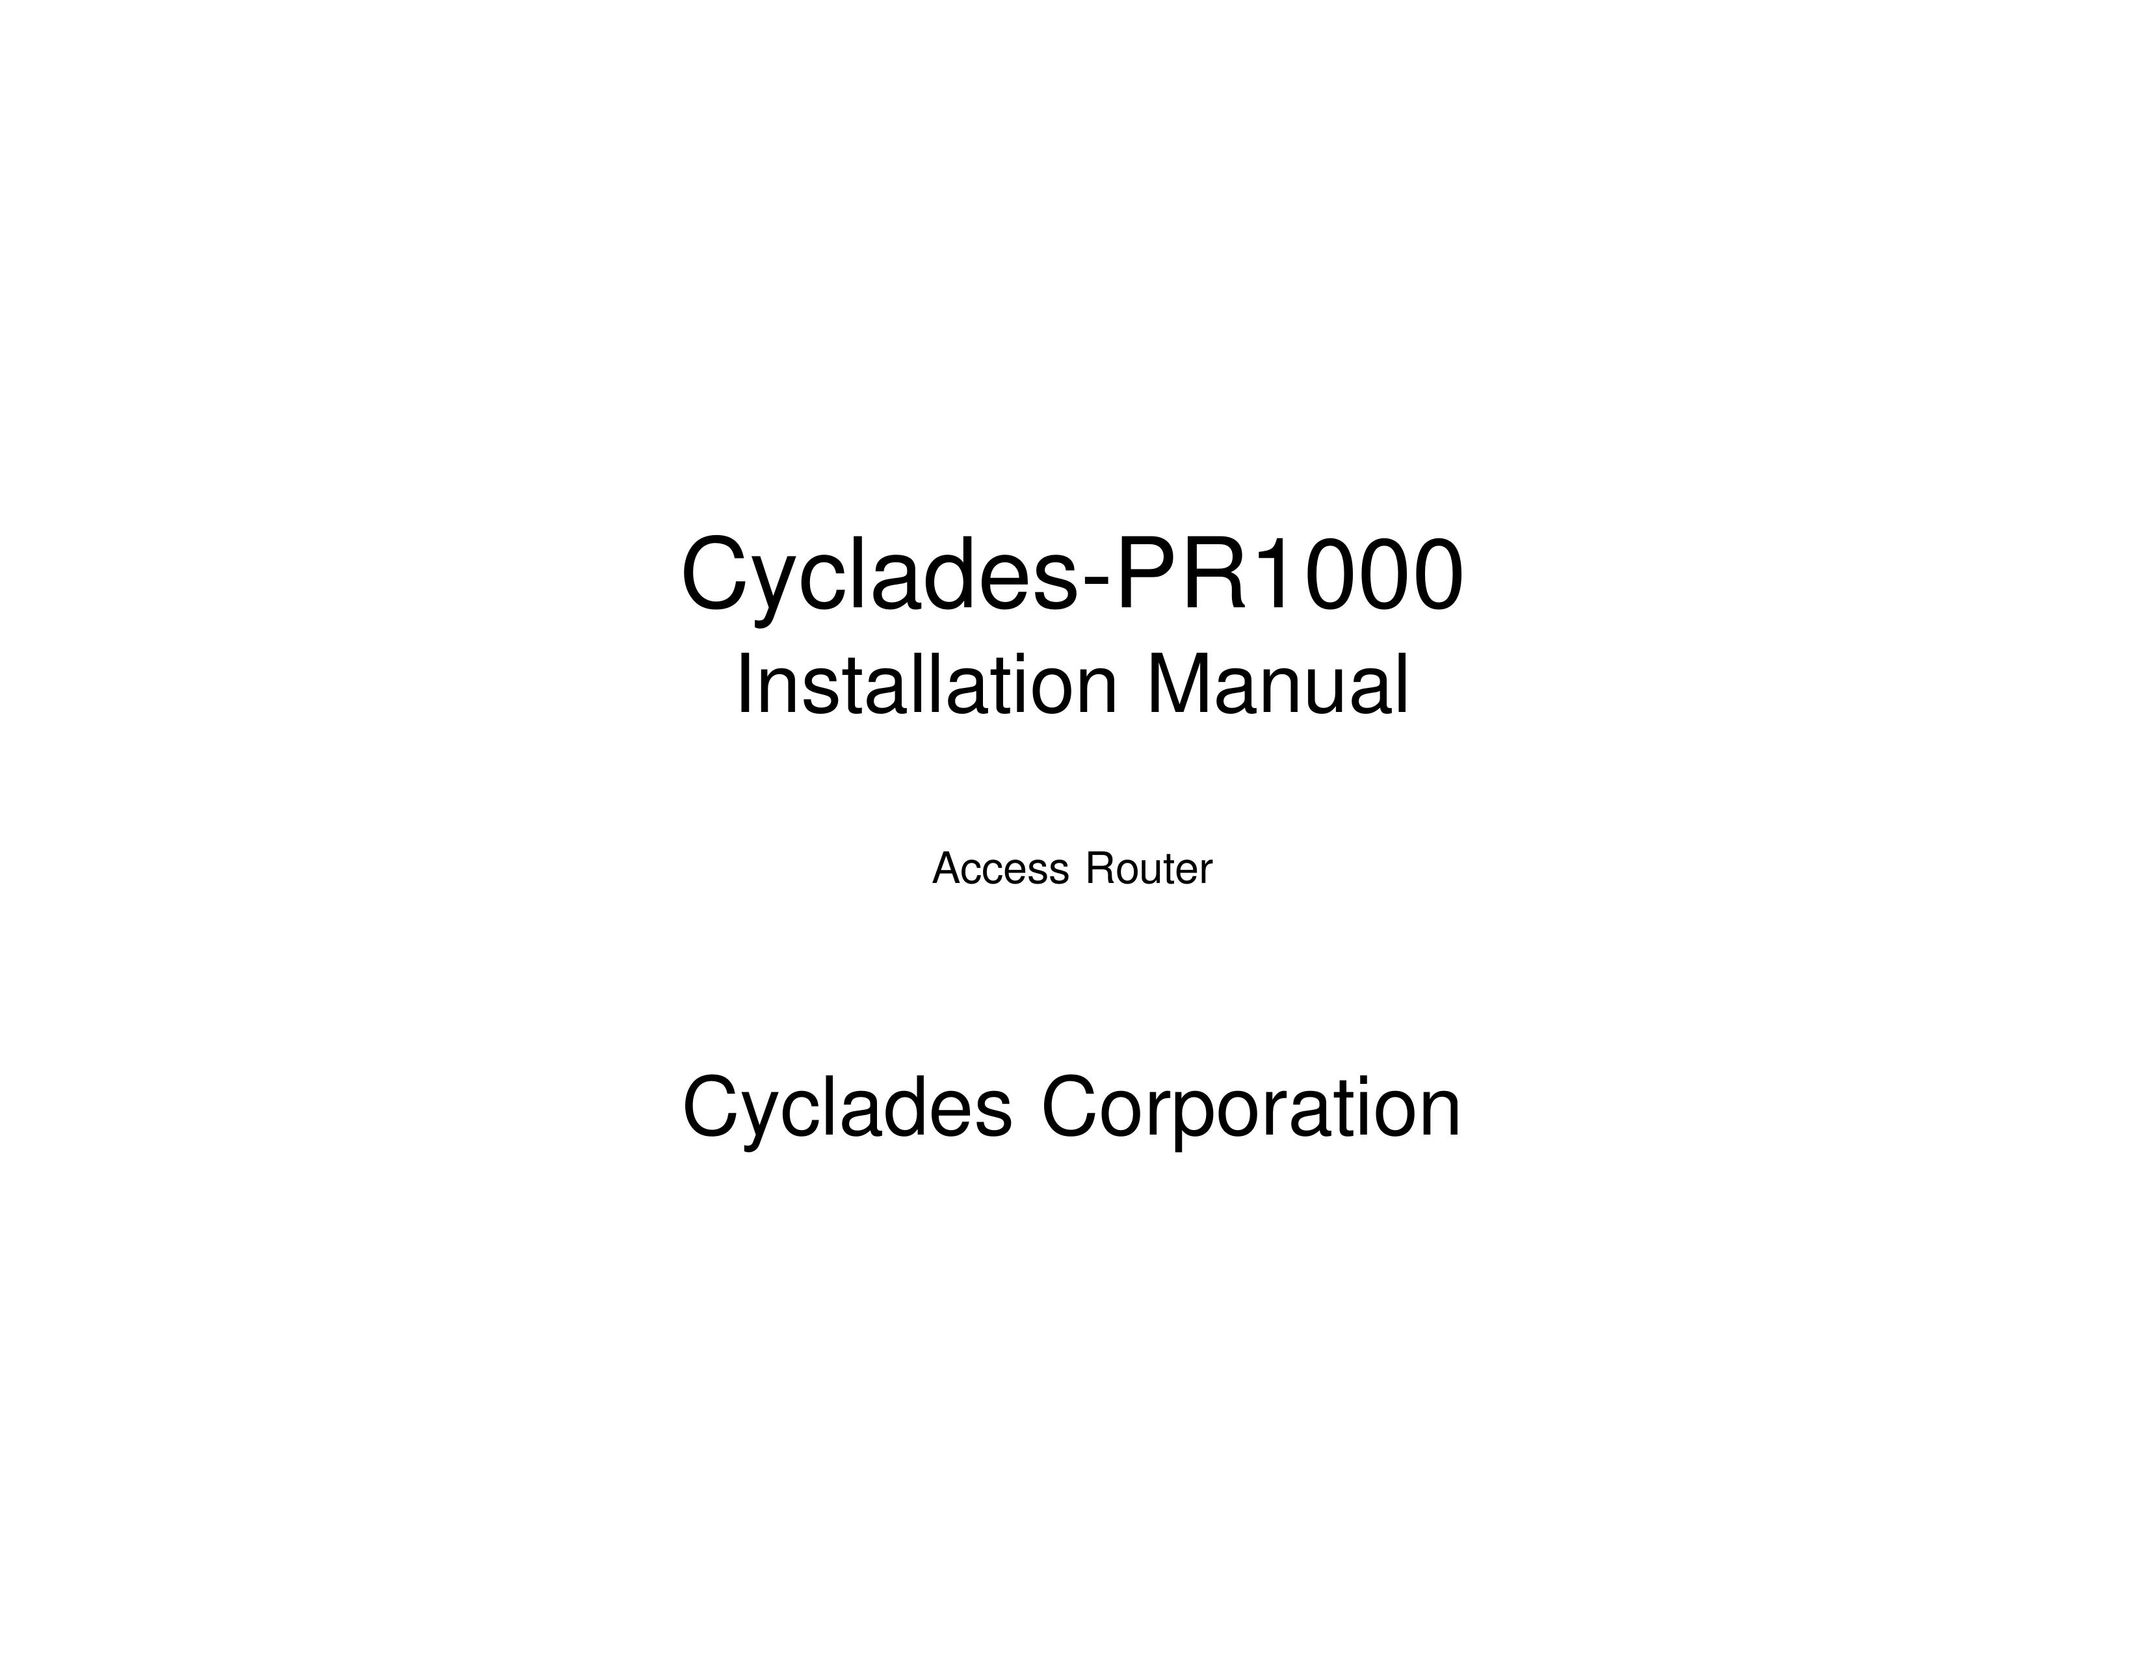 Avocent Cyclades-PR1000 Network Router User Manual